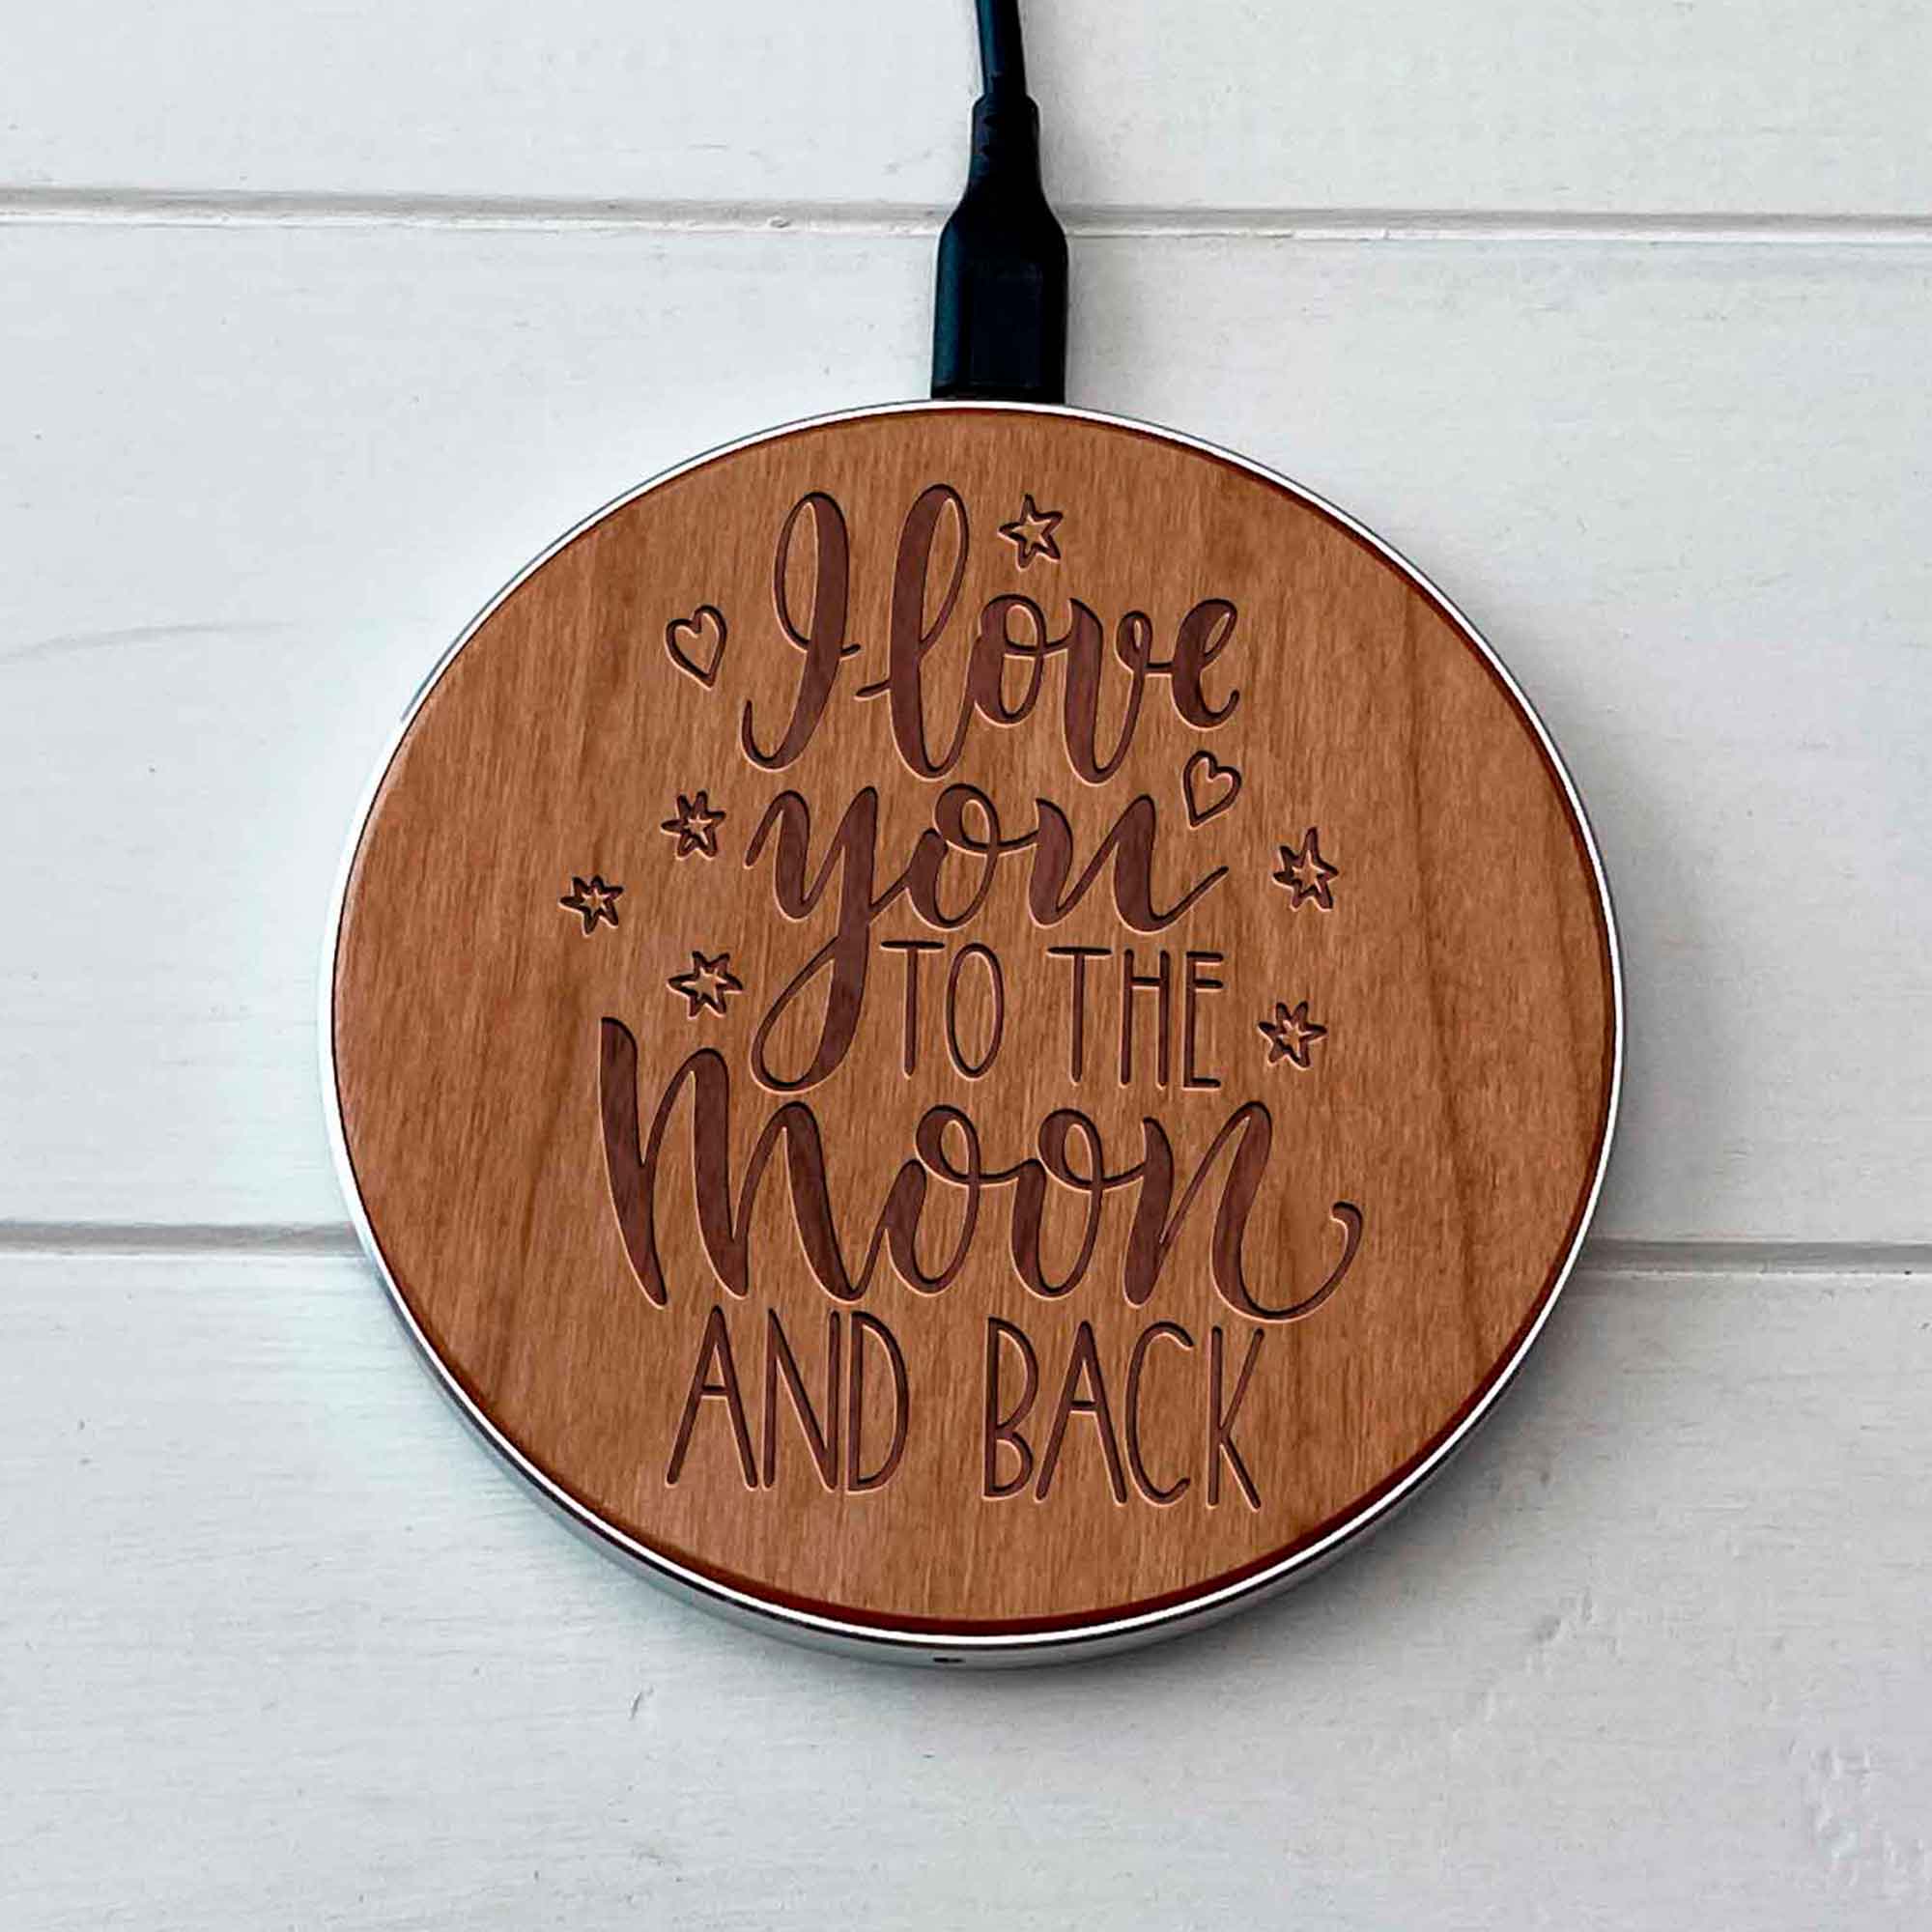 Wireless Fast Charger engraving Moon